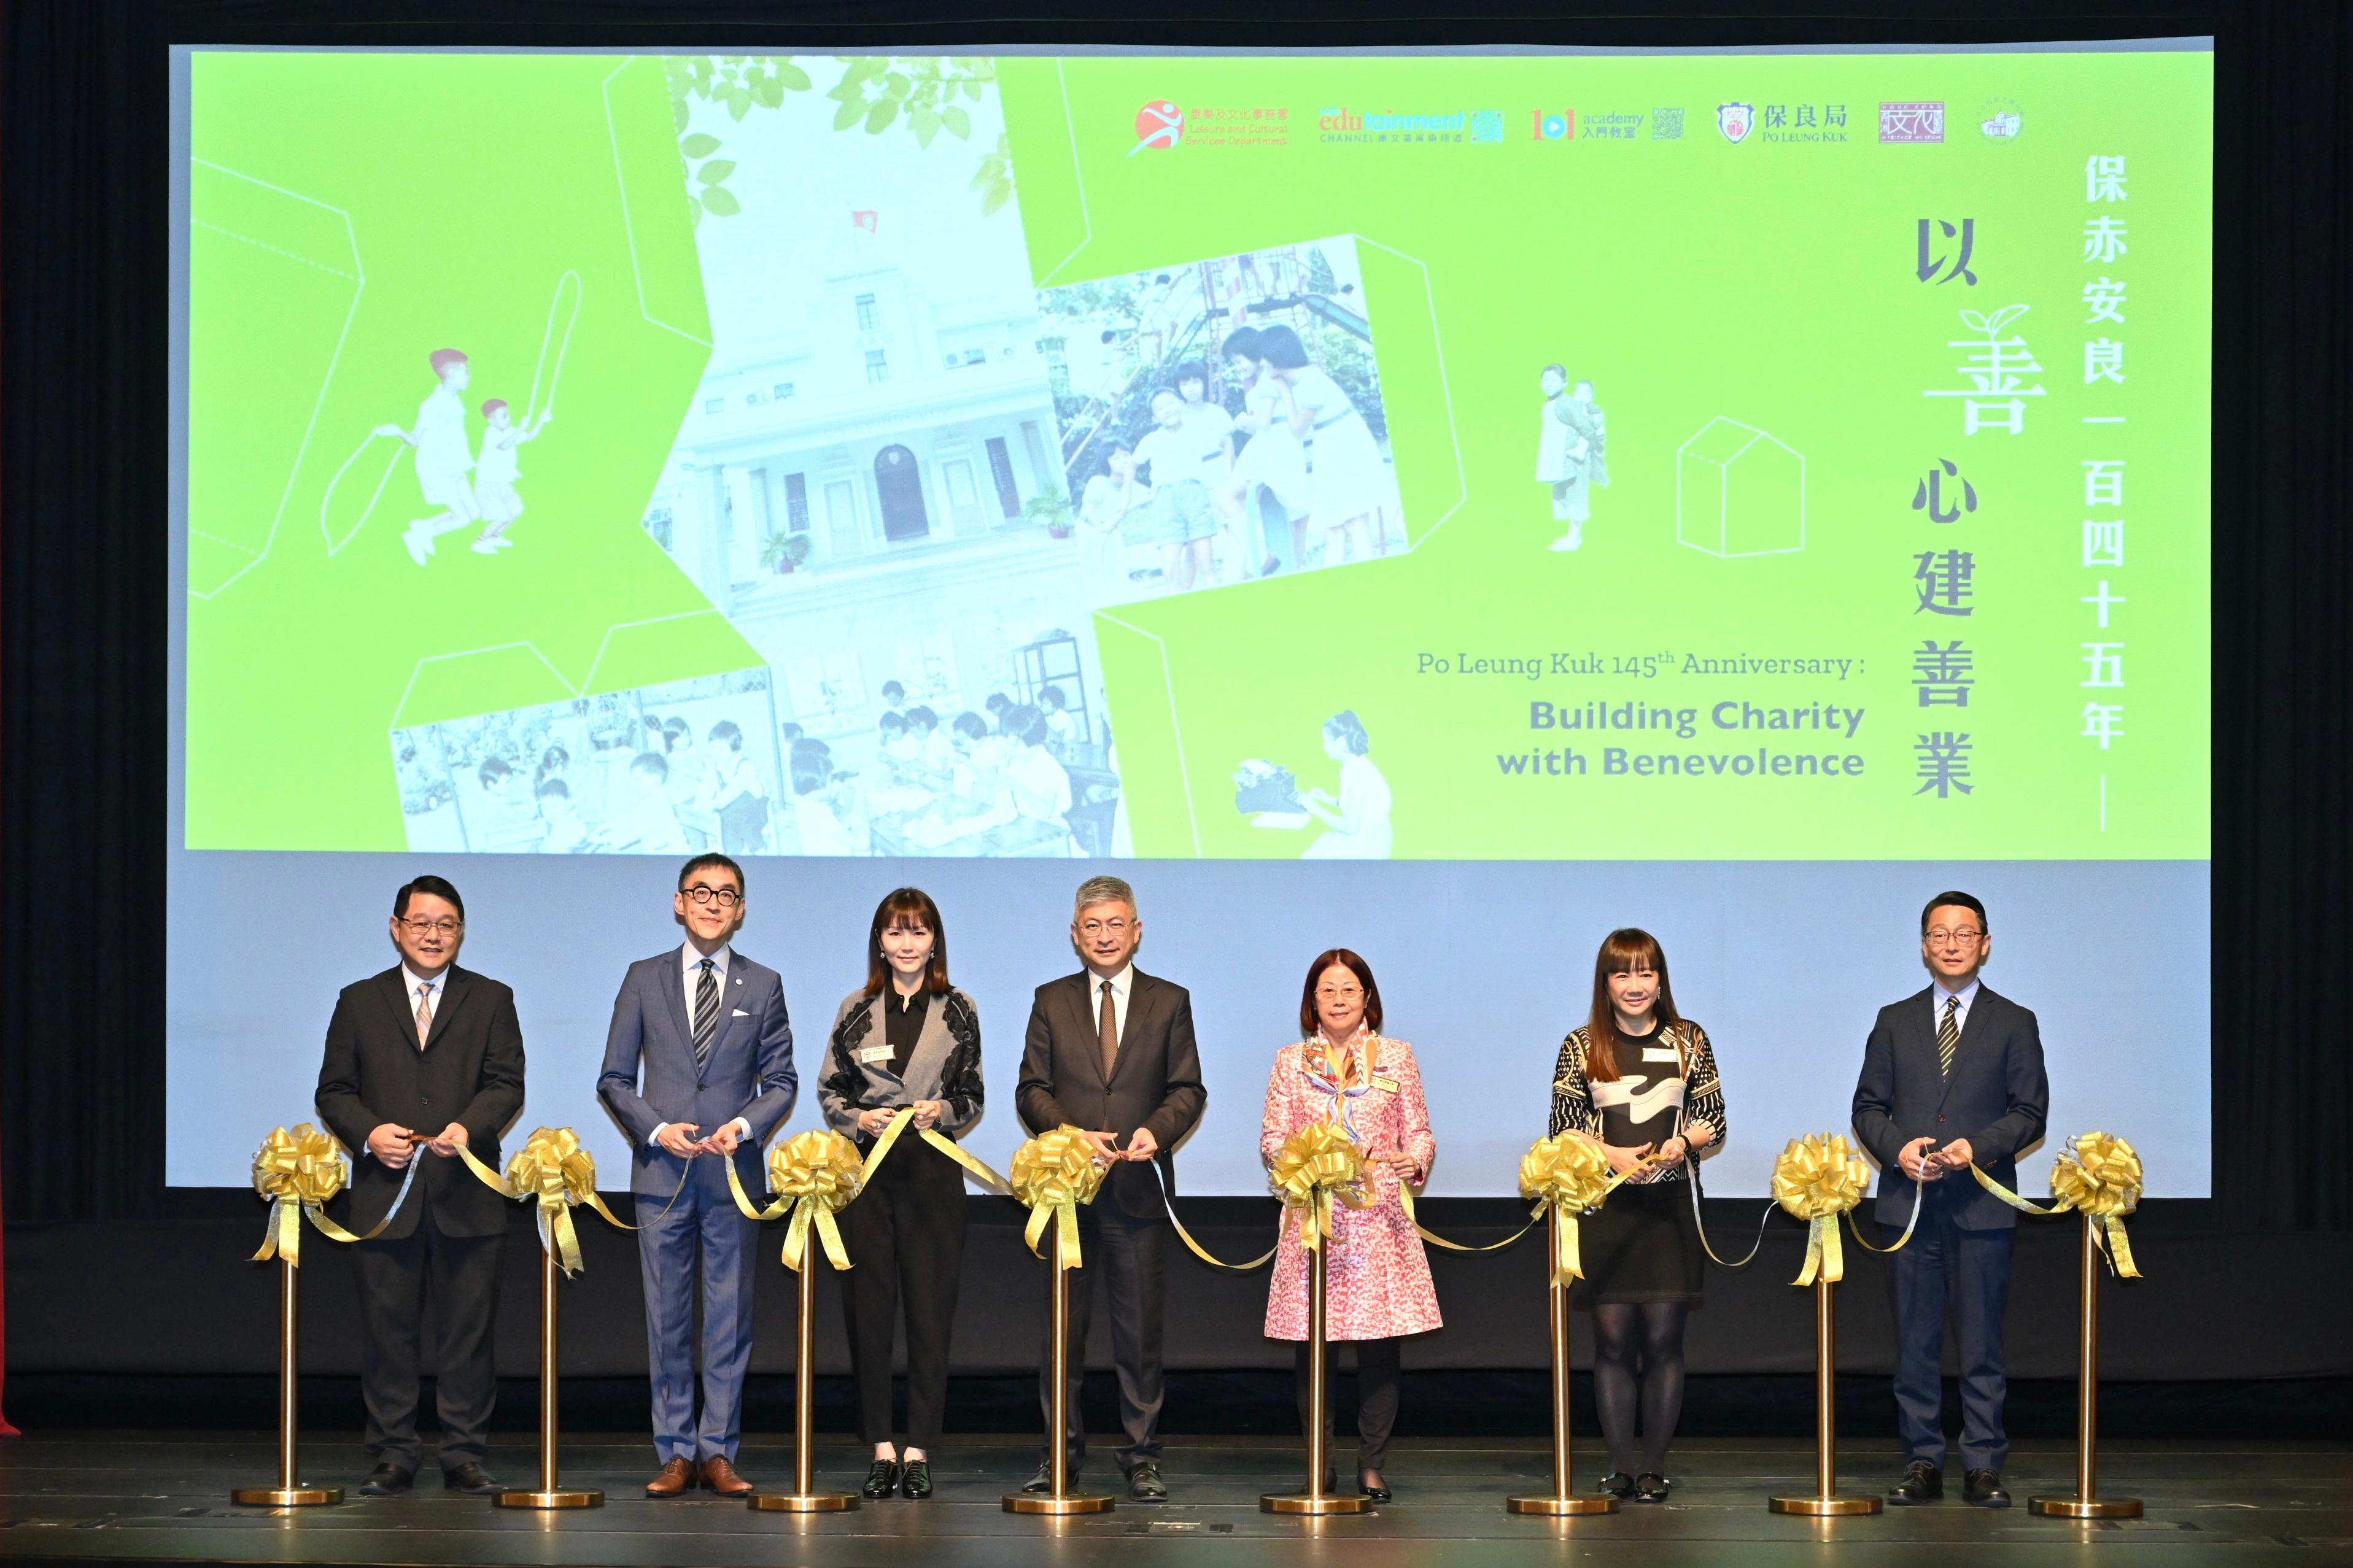 The opening ceremony for the exhibition "Po Leung Kuk 145th Anniversary: Building Charity with Benevolence" was held today (October 17) at the Hong Kong Heritage Museum (HKHM). Photo shows officiating guests (from left) the Museum Director of the HKHM, Mr Brian Lam; the Chairman of the Museum Advisory Committee, Professor Douglas So; the First Vice-Chairman of Po Leung Kuk, Mrs Helena Pong; the Under Secretary for Culture, Sports and Tourism, Mr Raistlin Lau; the Chairman of Po Leung Kuk, Mrs Winnie Chan; the Third Vice-Chairman of Po Leung Kuk, Miss Jenny Tam; and the Director of Leisure and Cultural Services, Mr Vincent Liu; at the event.
